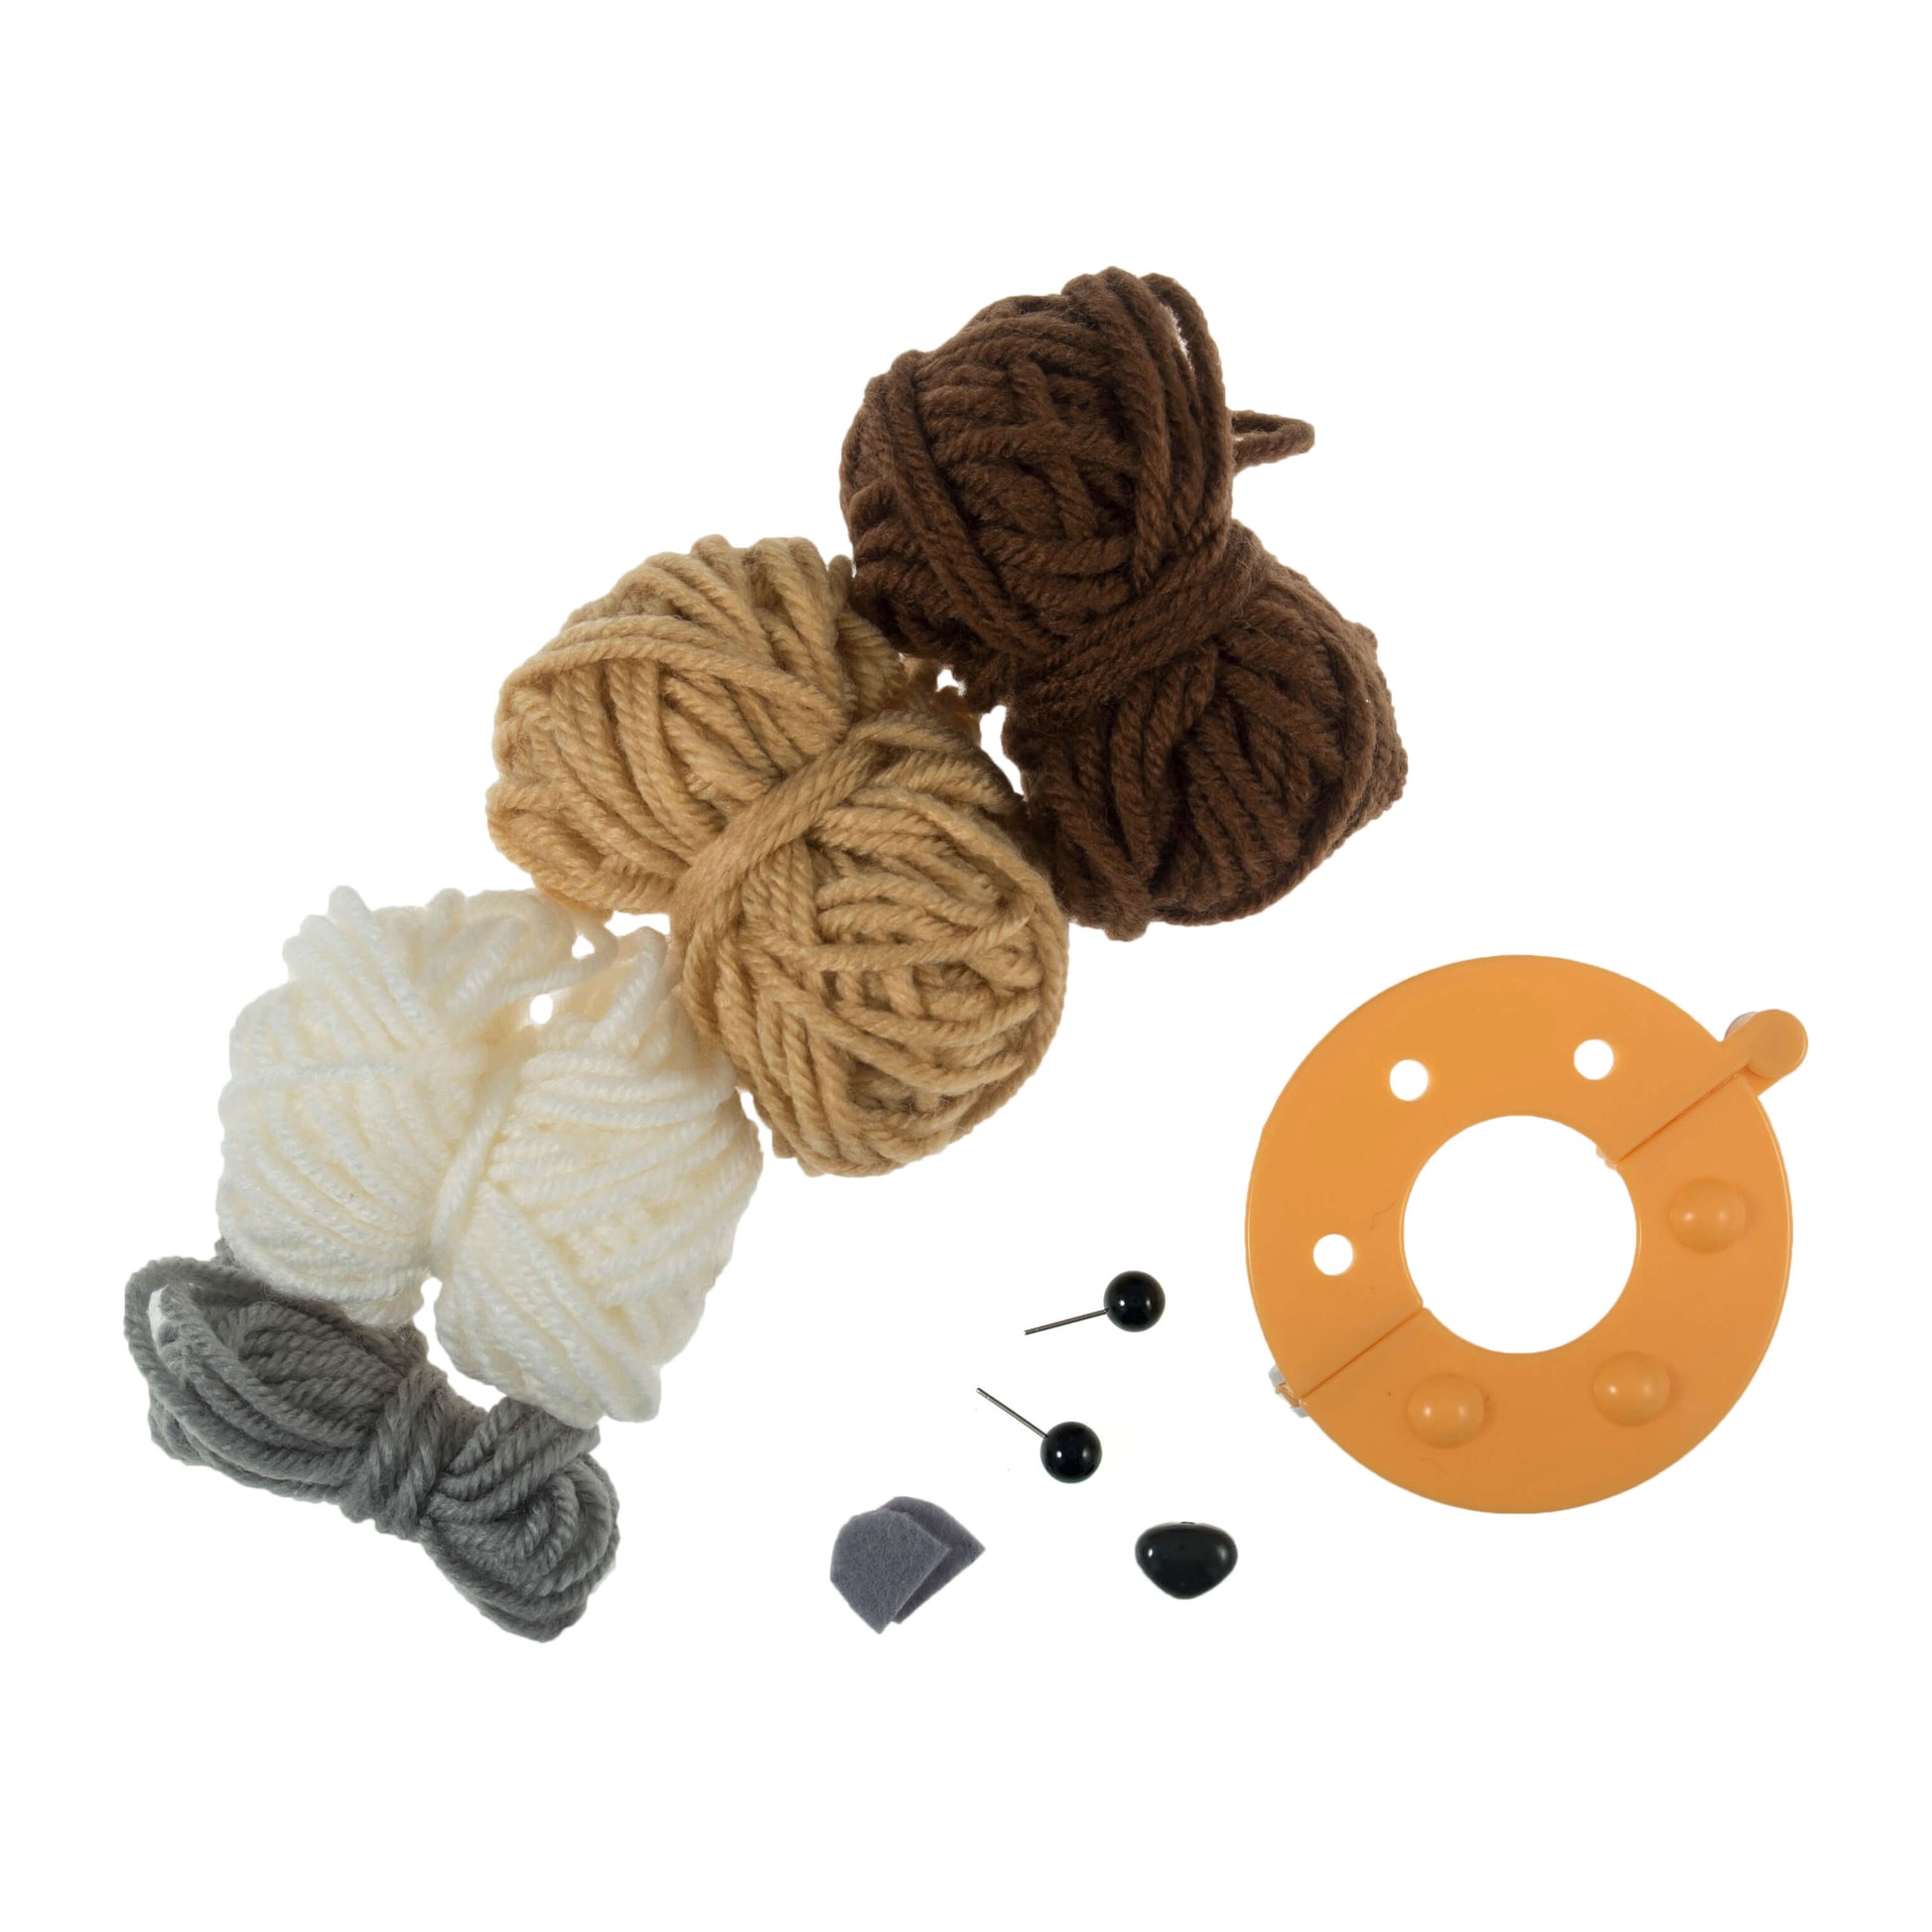 The image shows a pile of yarn and a pom pom maker on a white background.